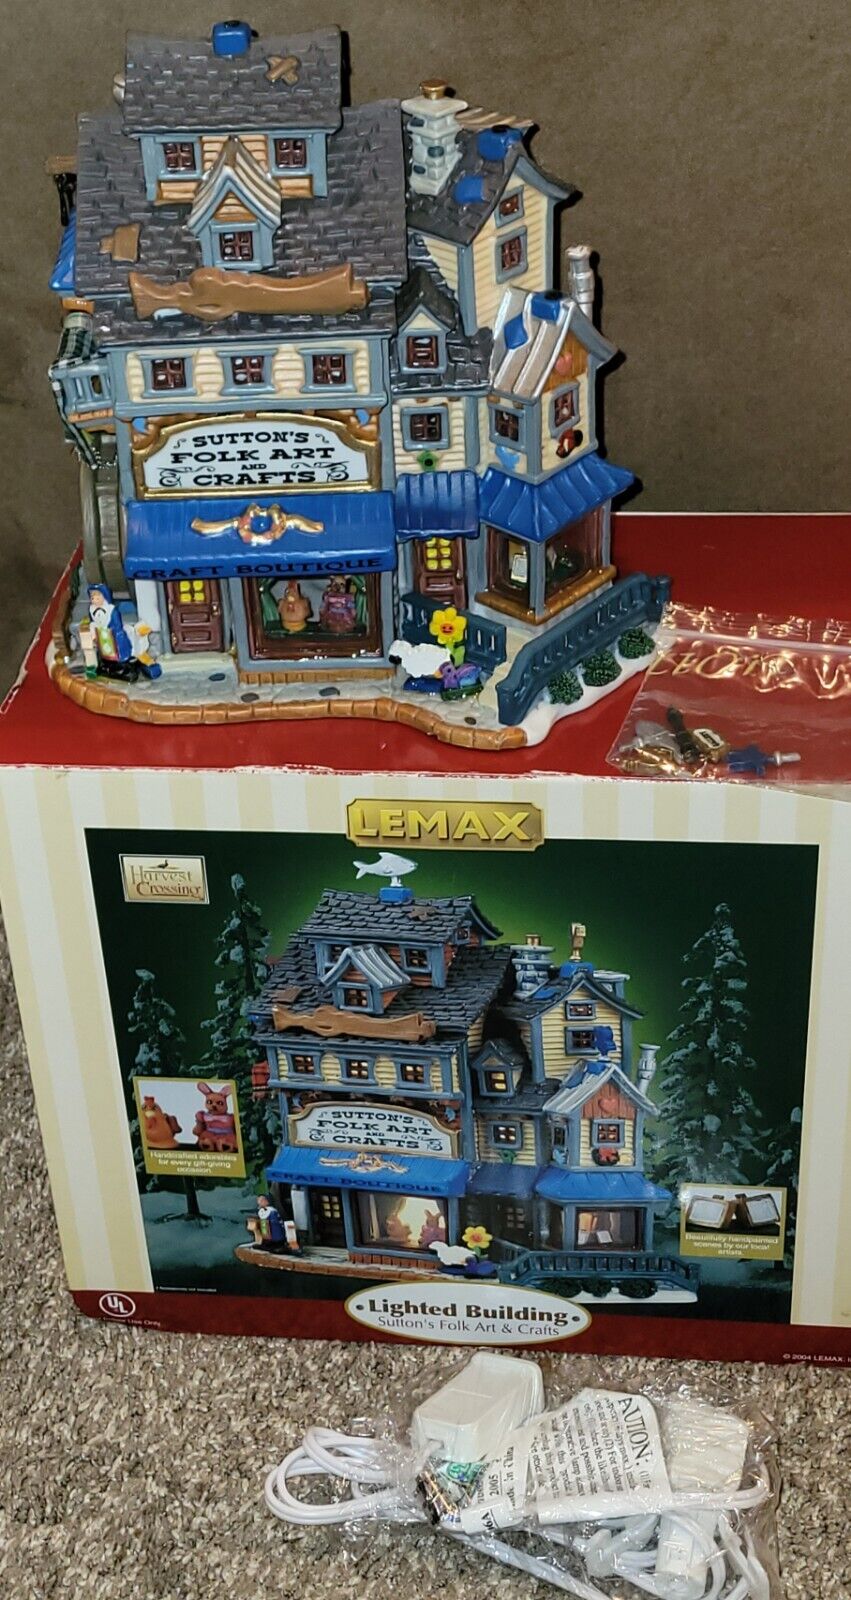 MIB RETIRED LEMAX 2004 SUTTON’S FOLK ART AND CRAFTS LIGHTED VILLAGE BUILDING